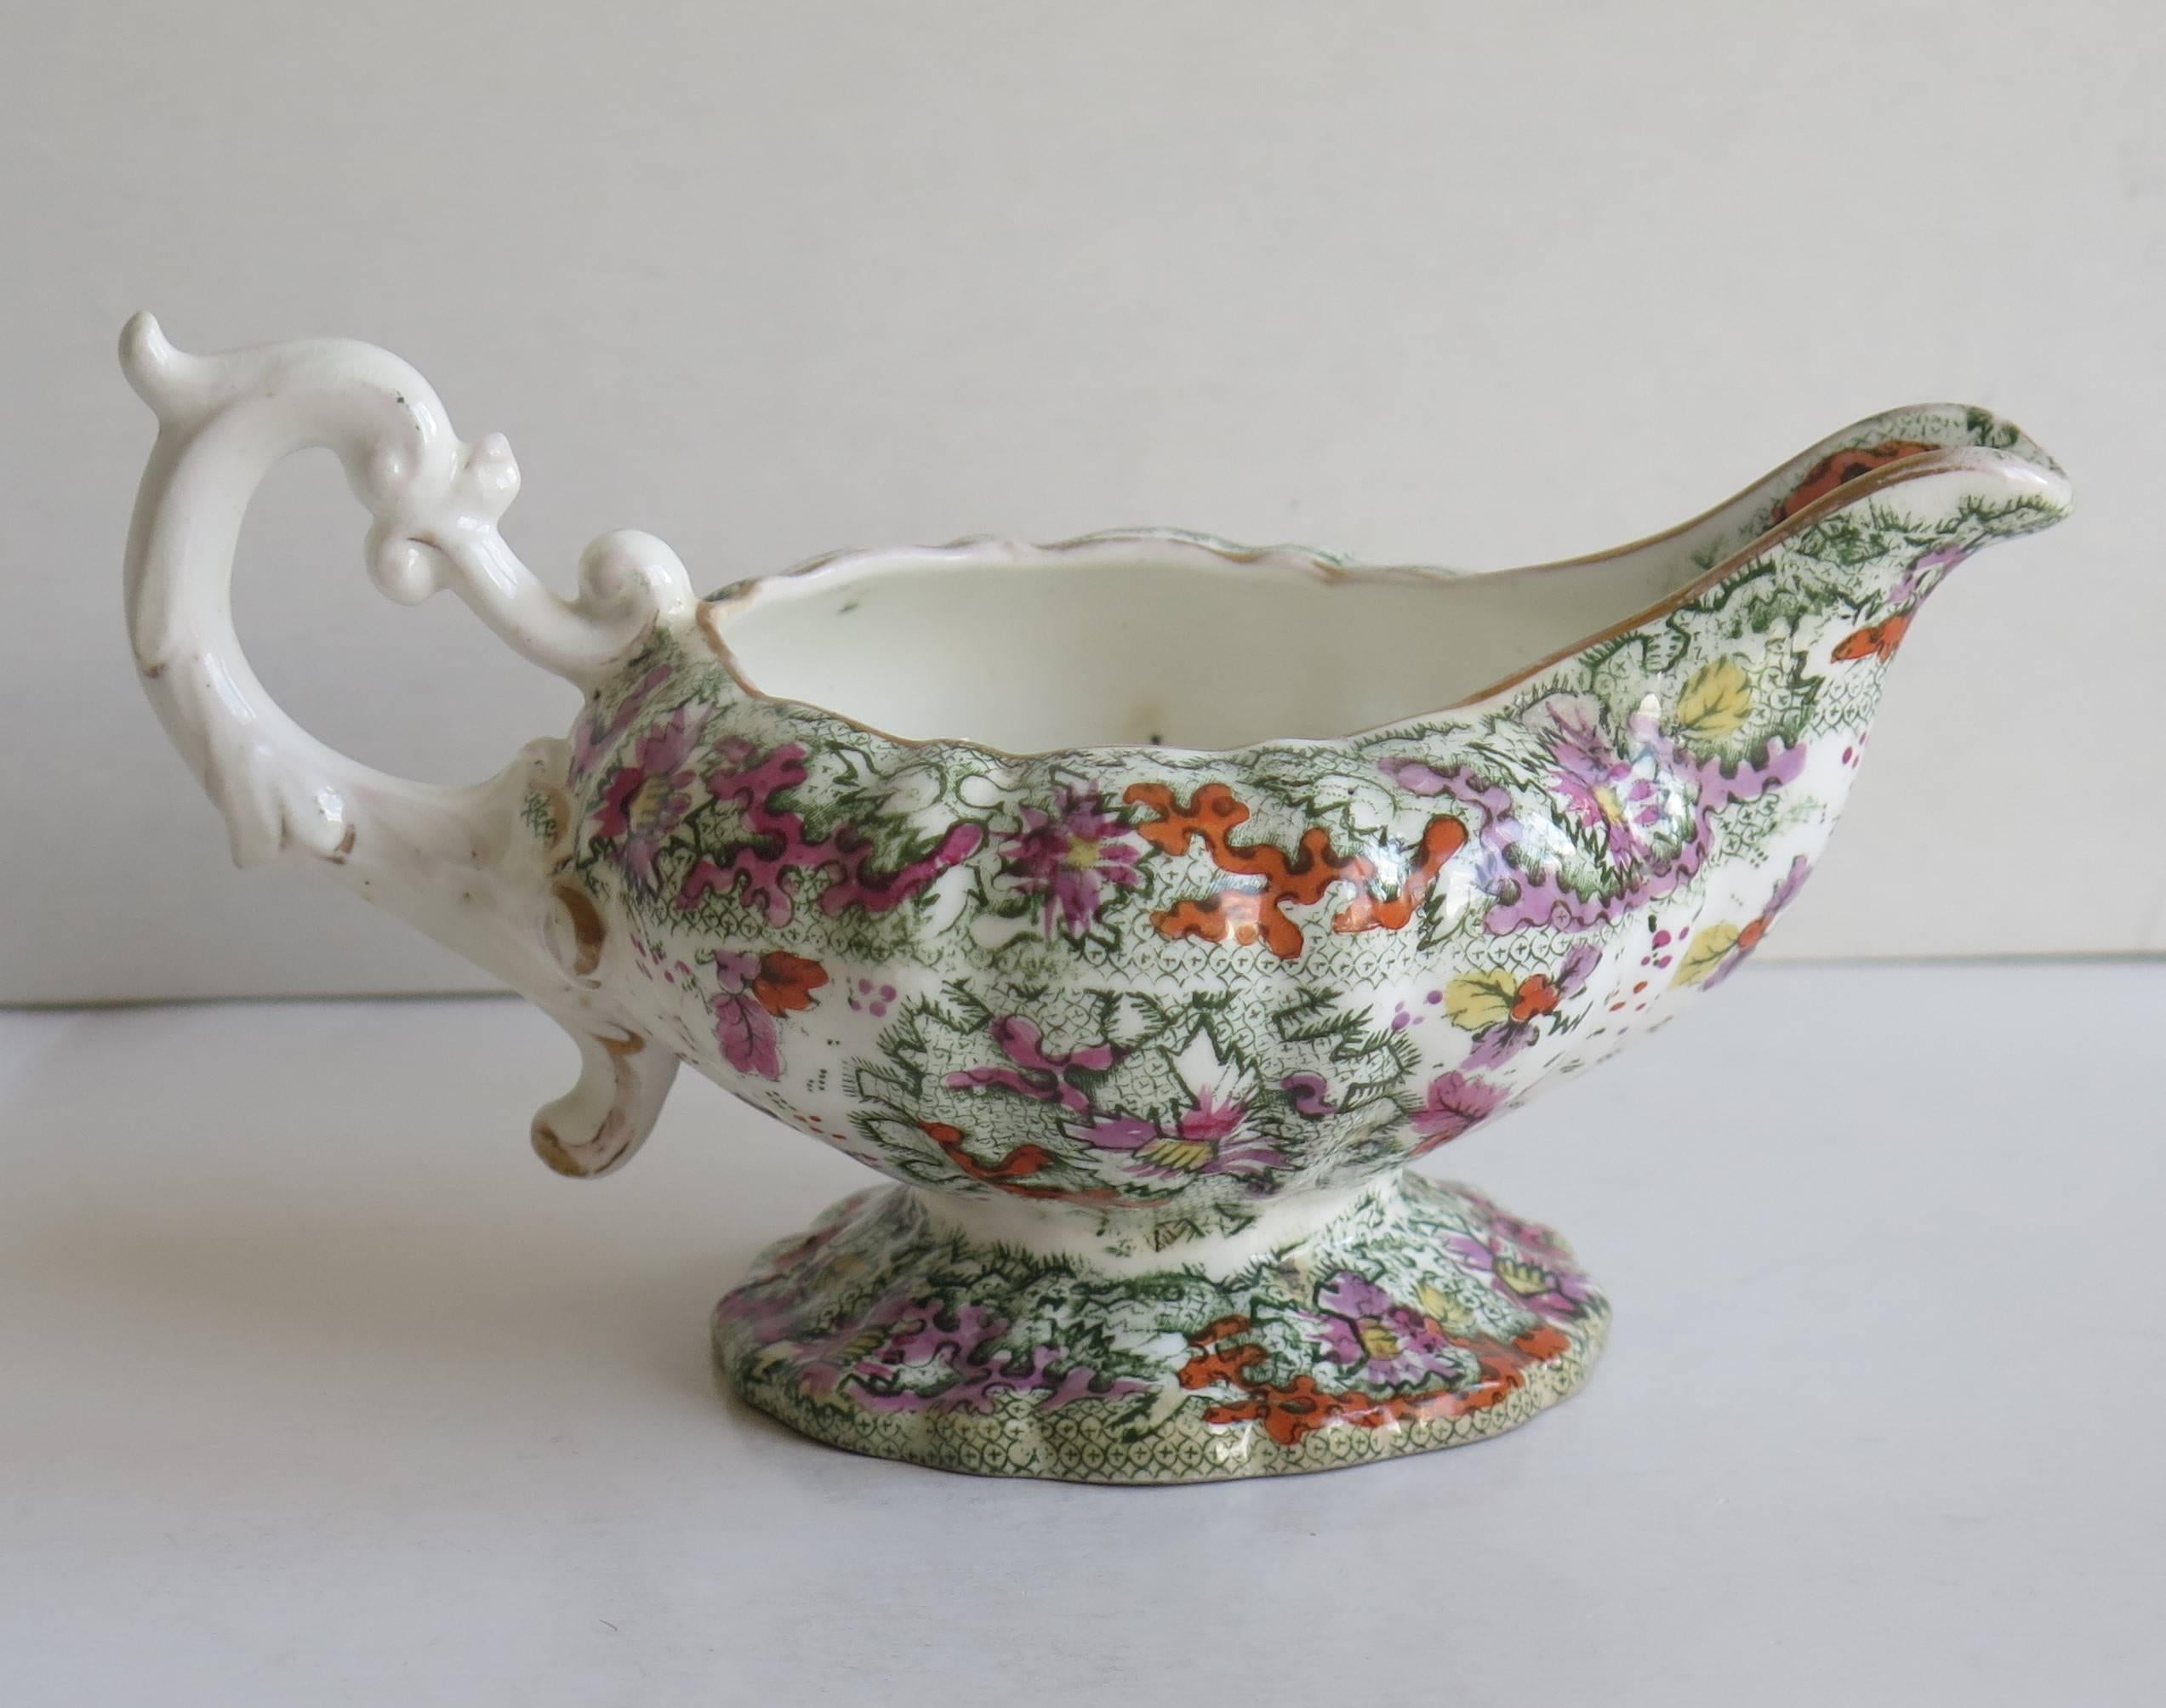 This is a porcelain cream or milk jug, produced by Mason's (C J ) at the Lane Delph, Staffordshire Potteries, England, circa 1832-1836.

The jug is footed and vertically fluted with a good rococo loop handle, having an upper and lower spur.

The